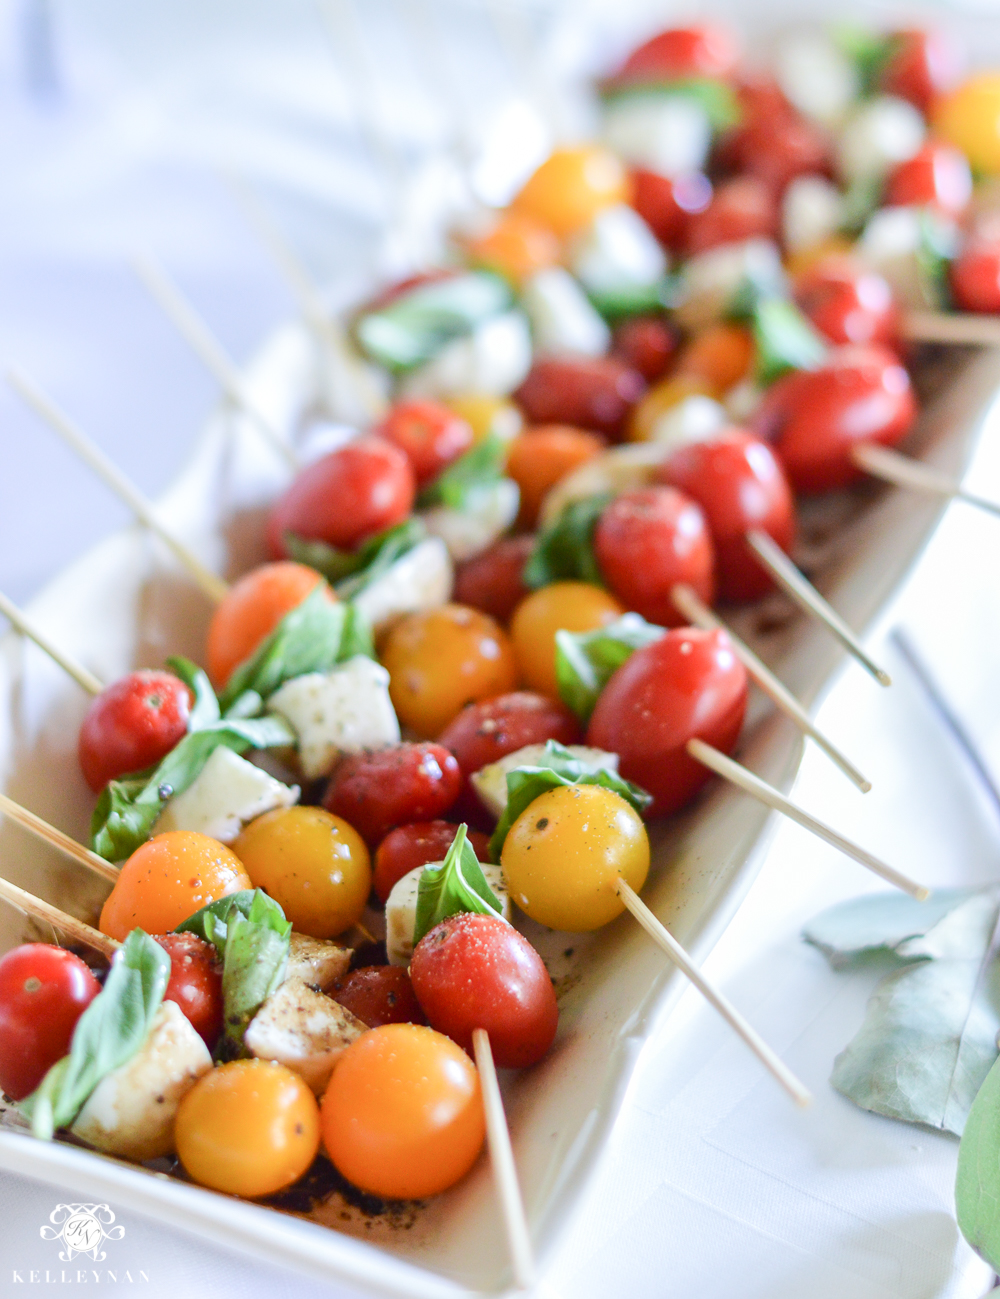 Southern Garden Party Bridal Shower Ideas- beautiful caprese skewers